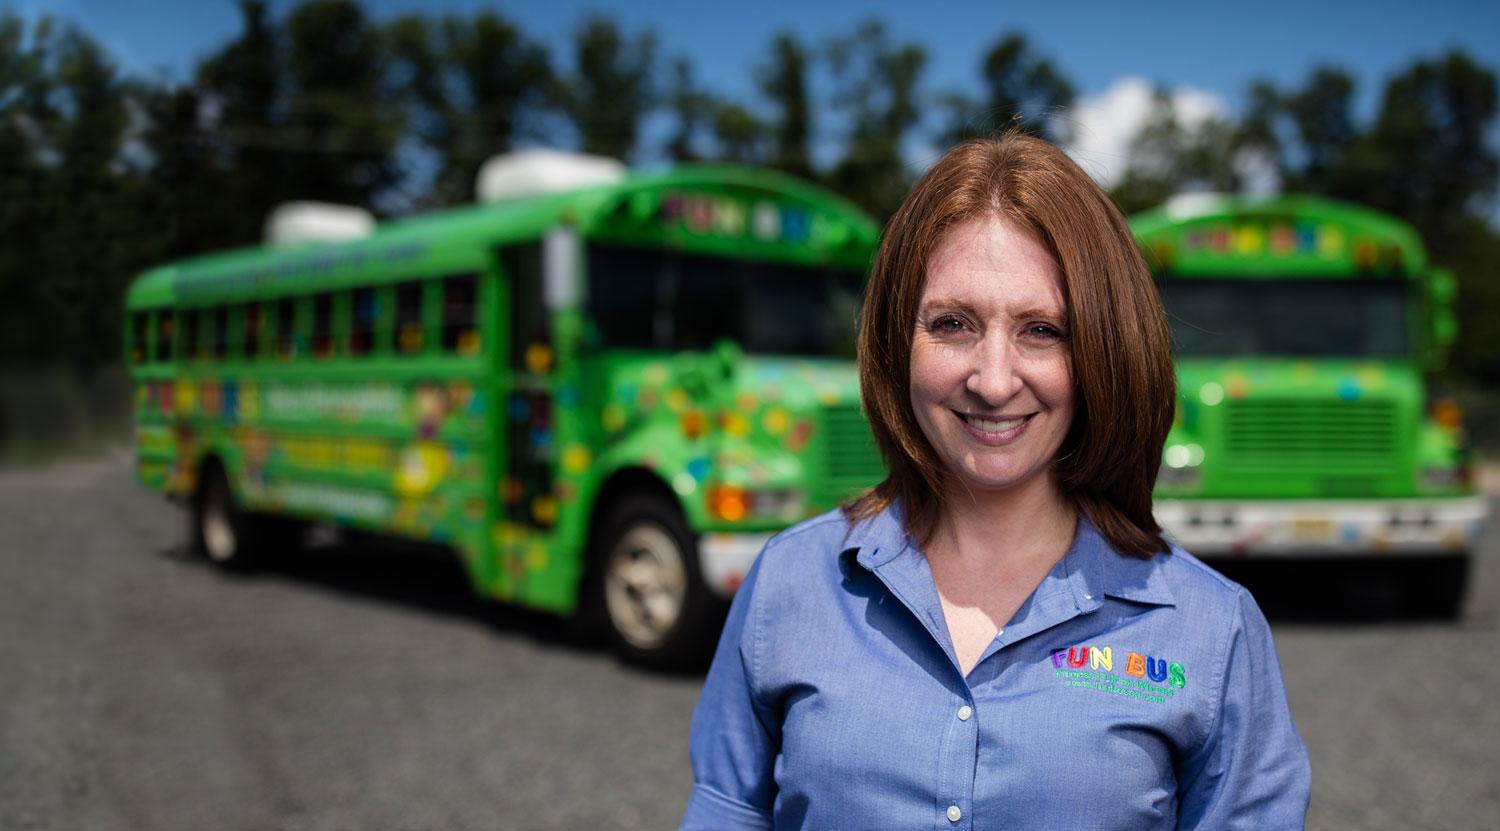 Stacey Kimmins of Fun Bus mobile franchise transitions as Chair of the RVCC Foundation Board of Directors